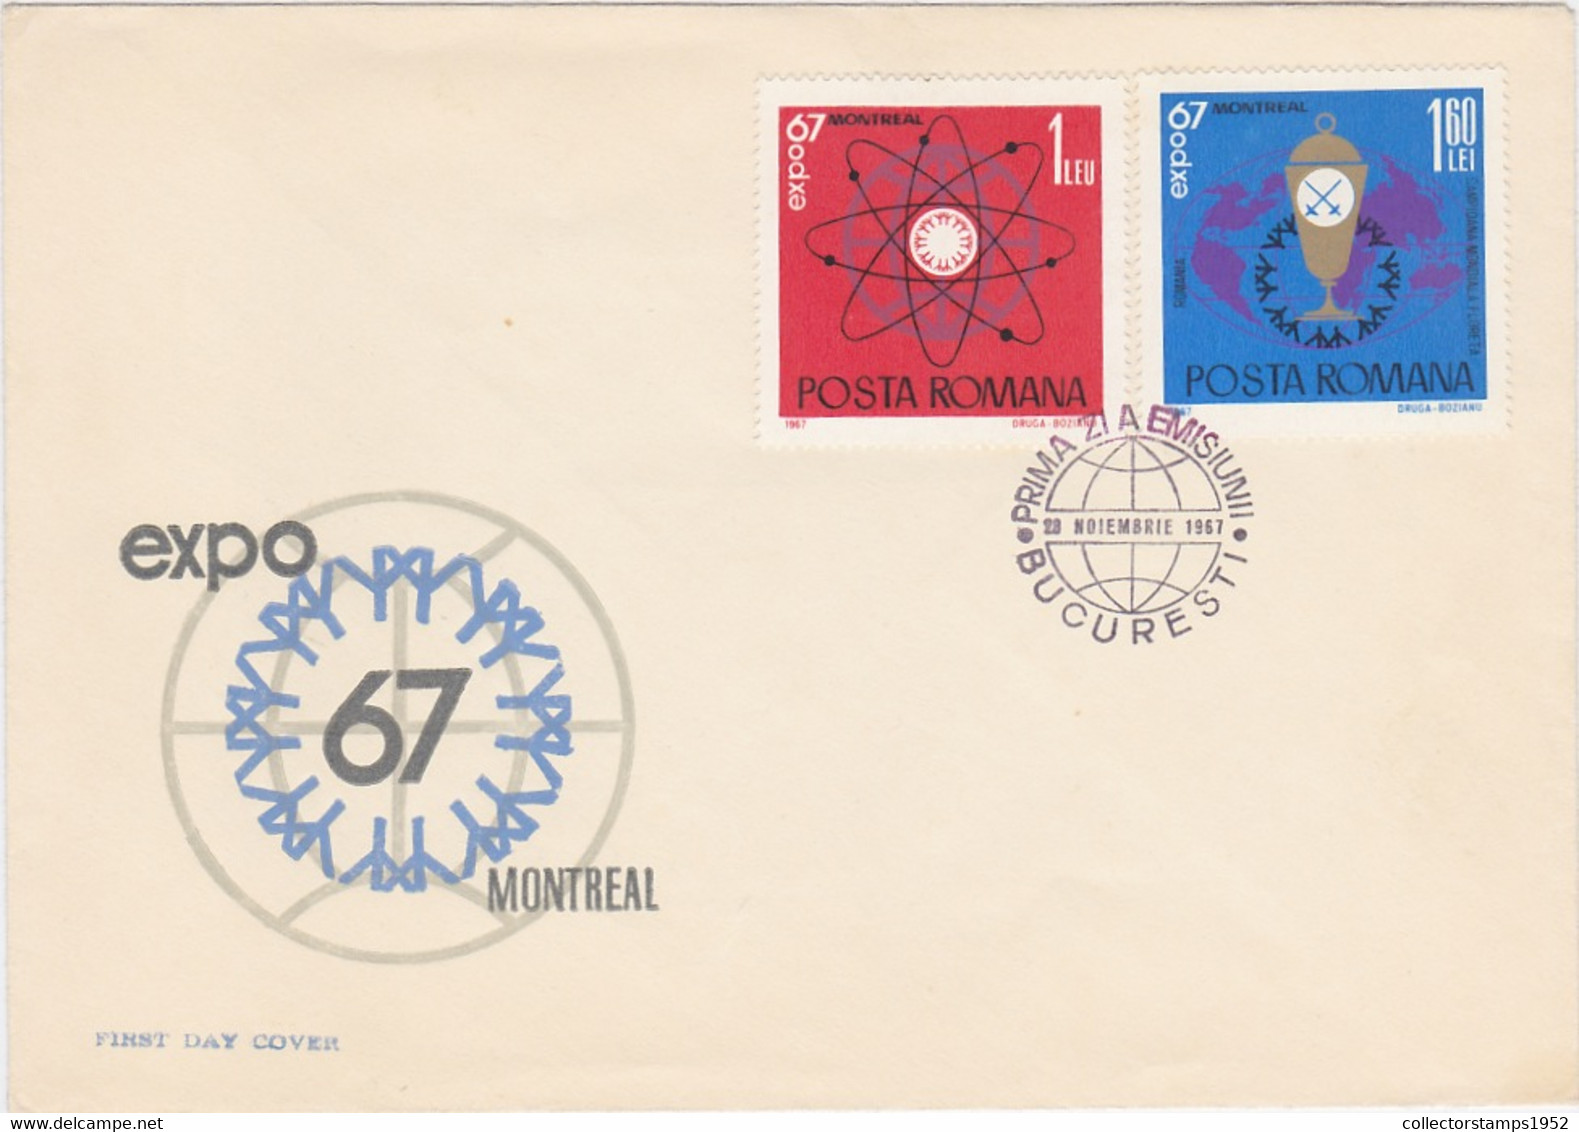 W0950- EXPO'67, MONTREAL, UNIVERSAL EXHIBITIONS, COVER FDC, 1967, ROMANIA - 1967 – Montreal (Canada)